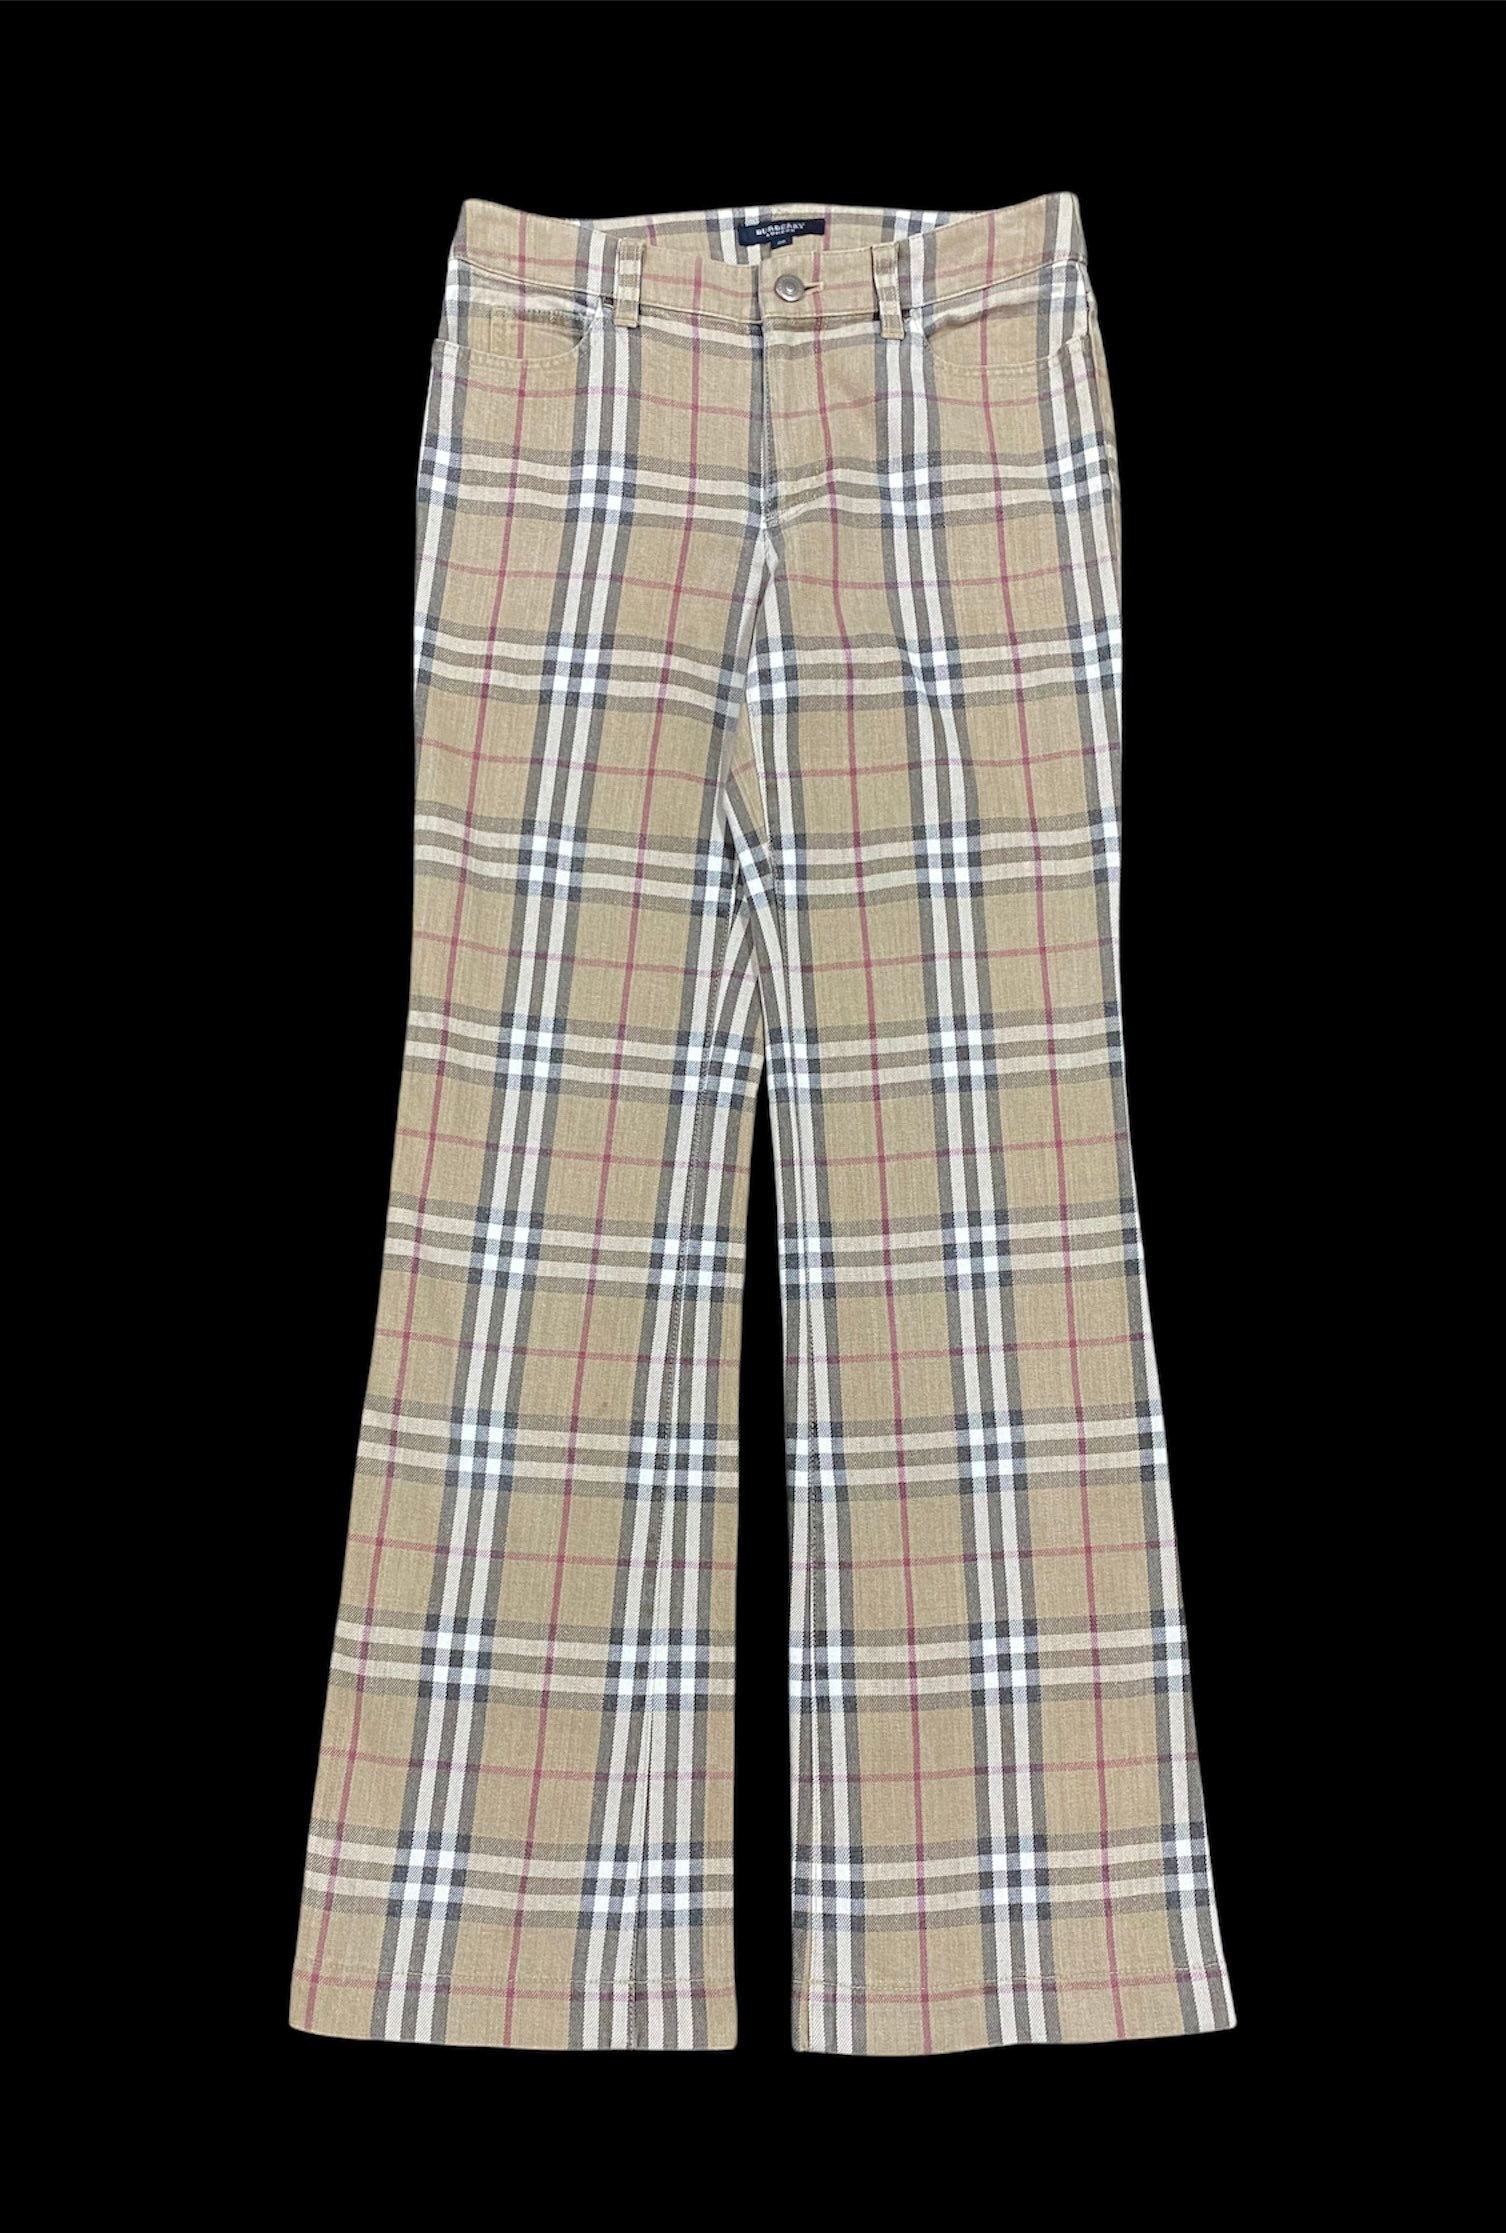 Top more than 81 burberry trousers mens vintage best - in.cdgdbentre